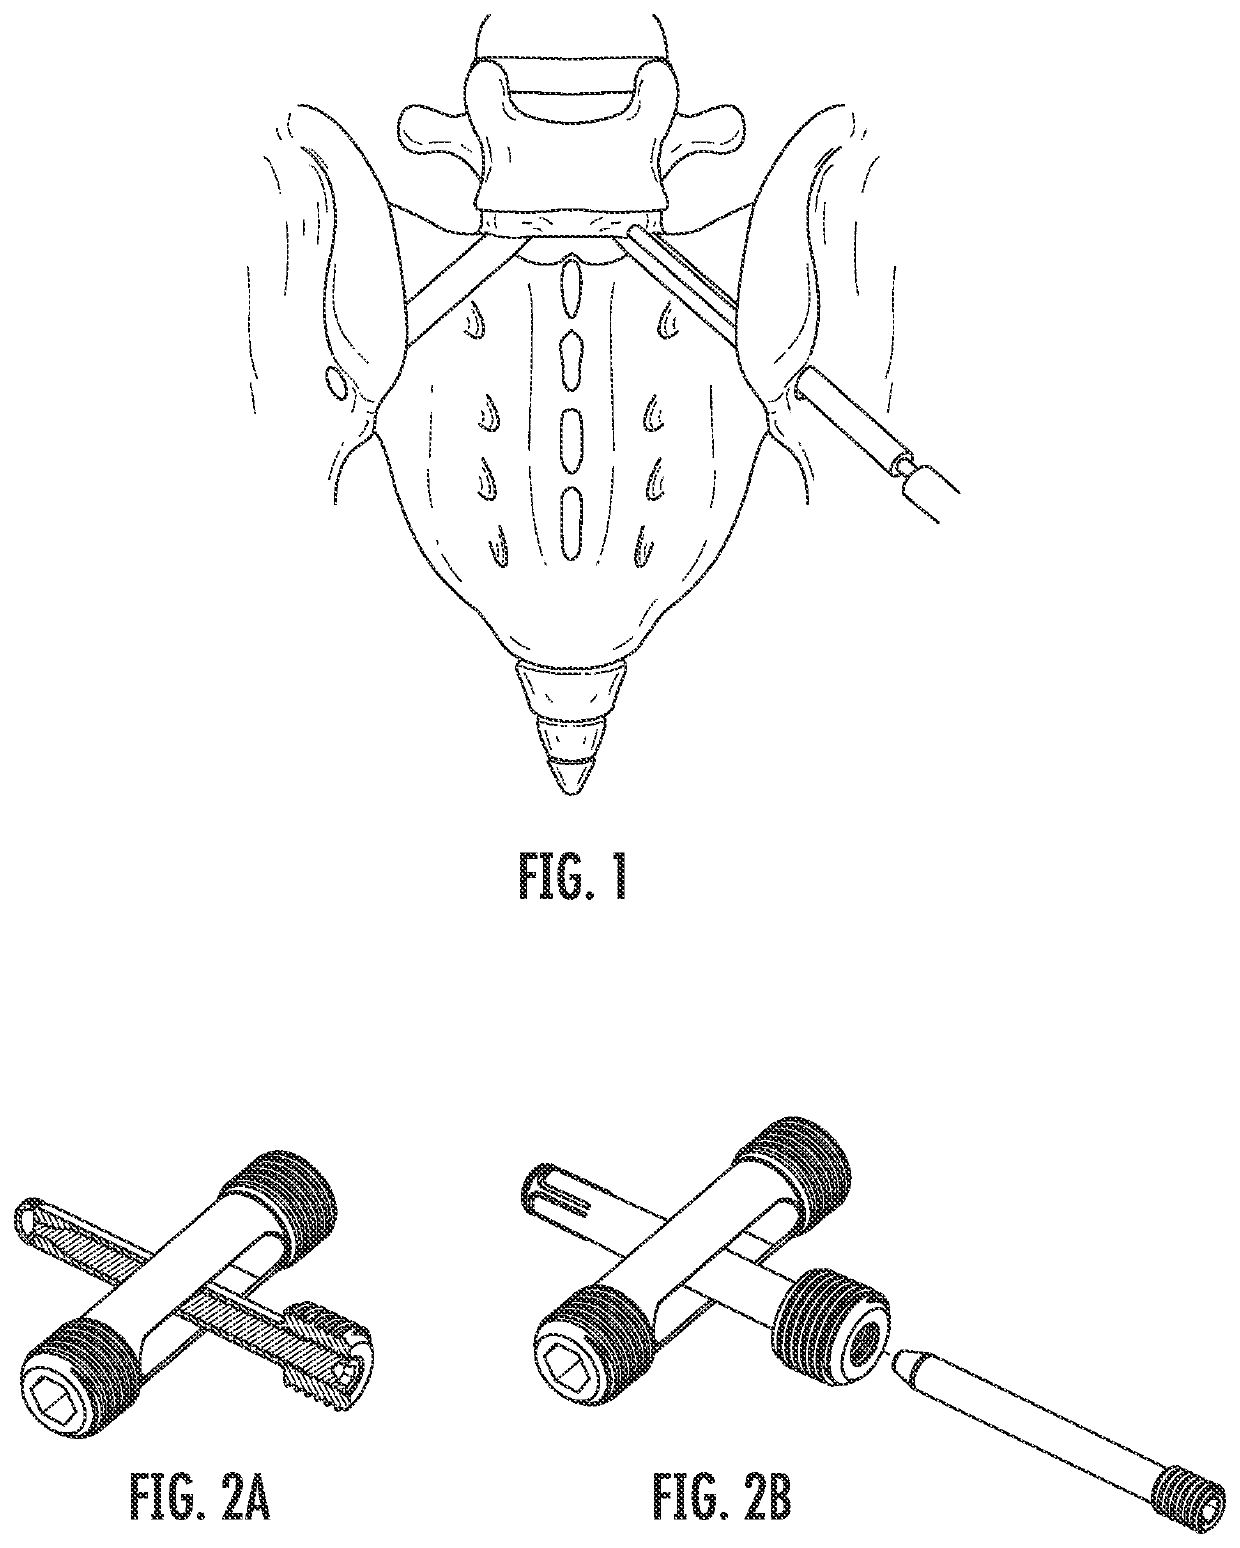 Method for performing spinal surical procedures through the sacral ala